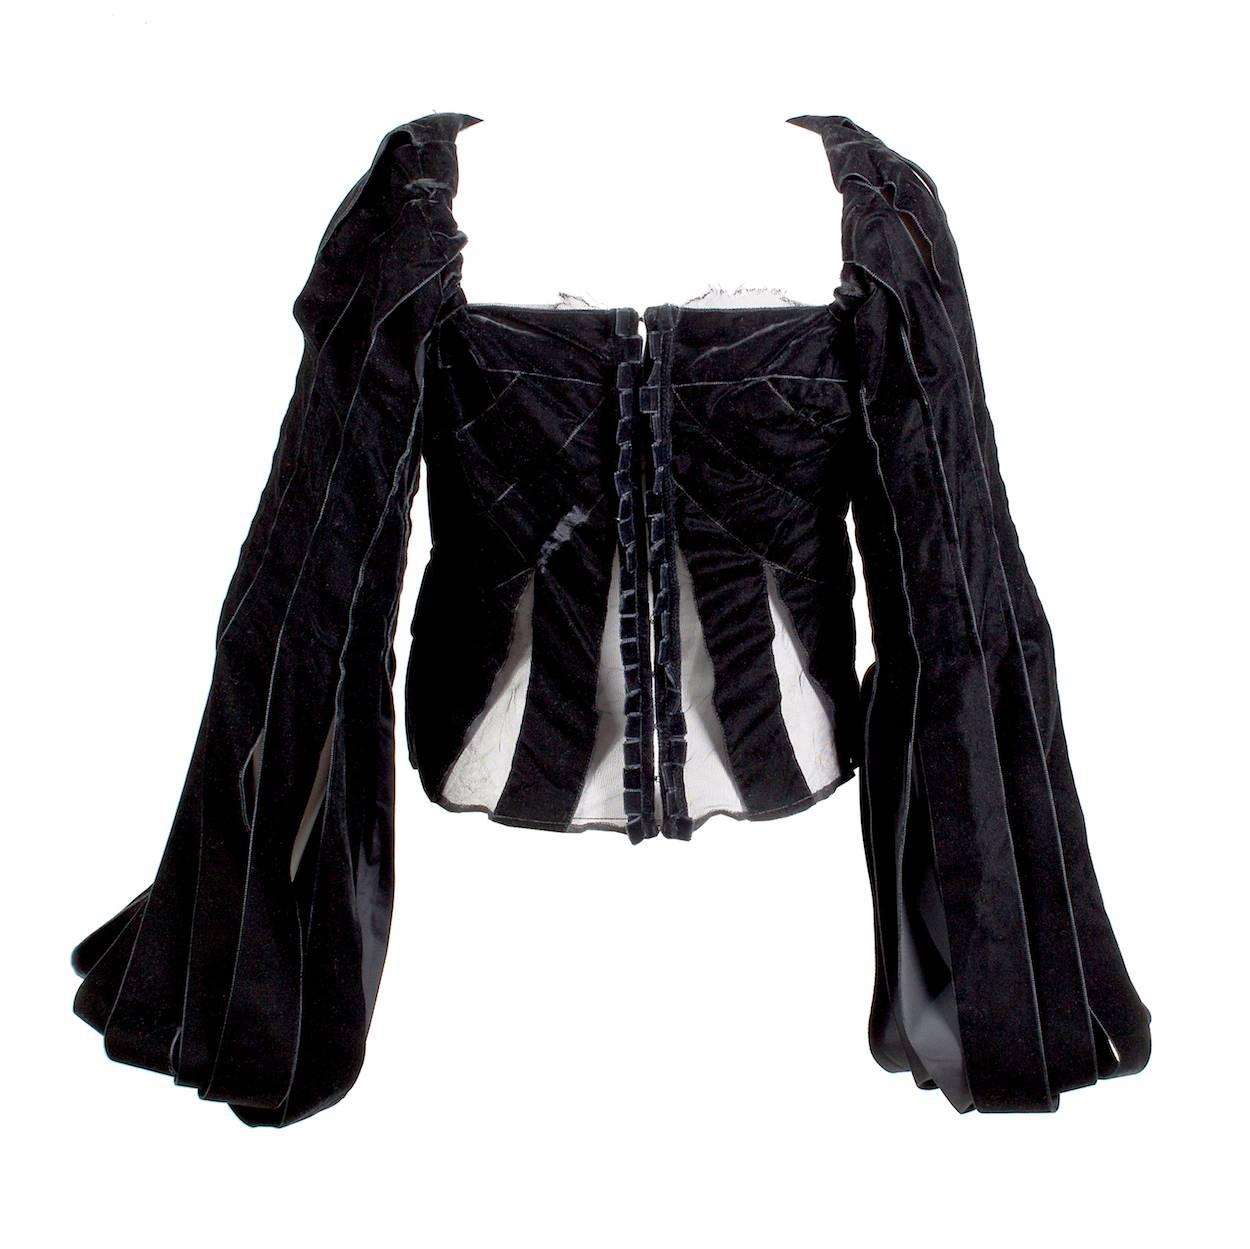 This is a top by Tom Ford for YSL rive gauche.  It features a structured corset body with large velvet ribbons creating a bishop style sleeve.  There is black mesh accents in the corset.  

33